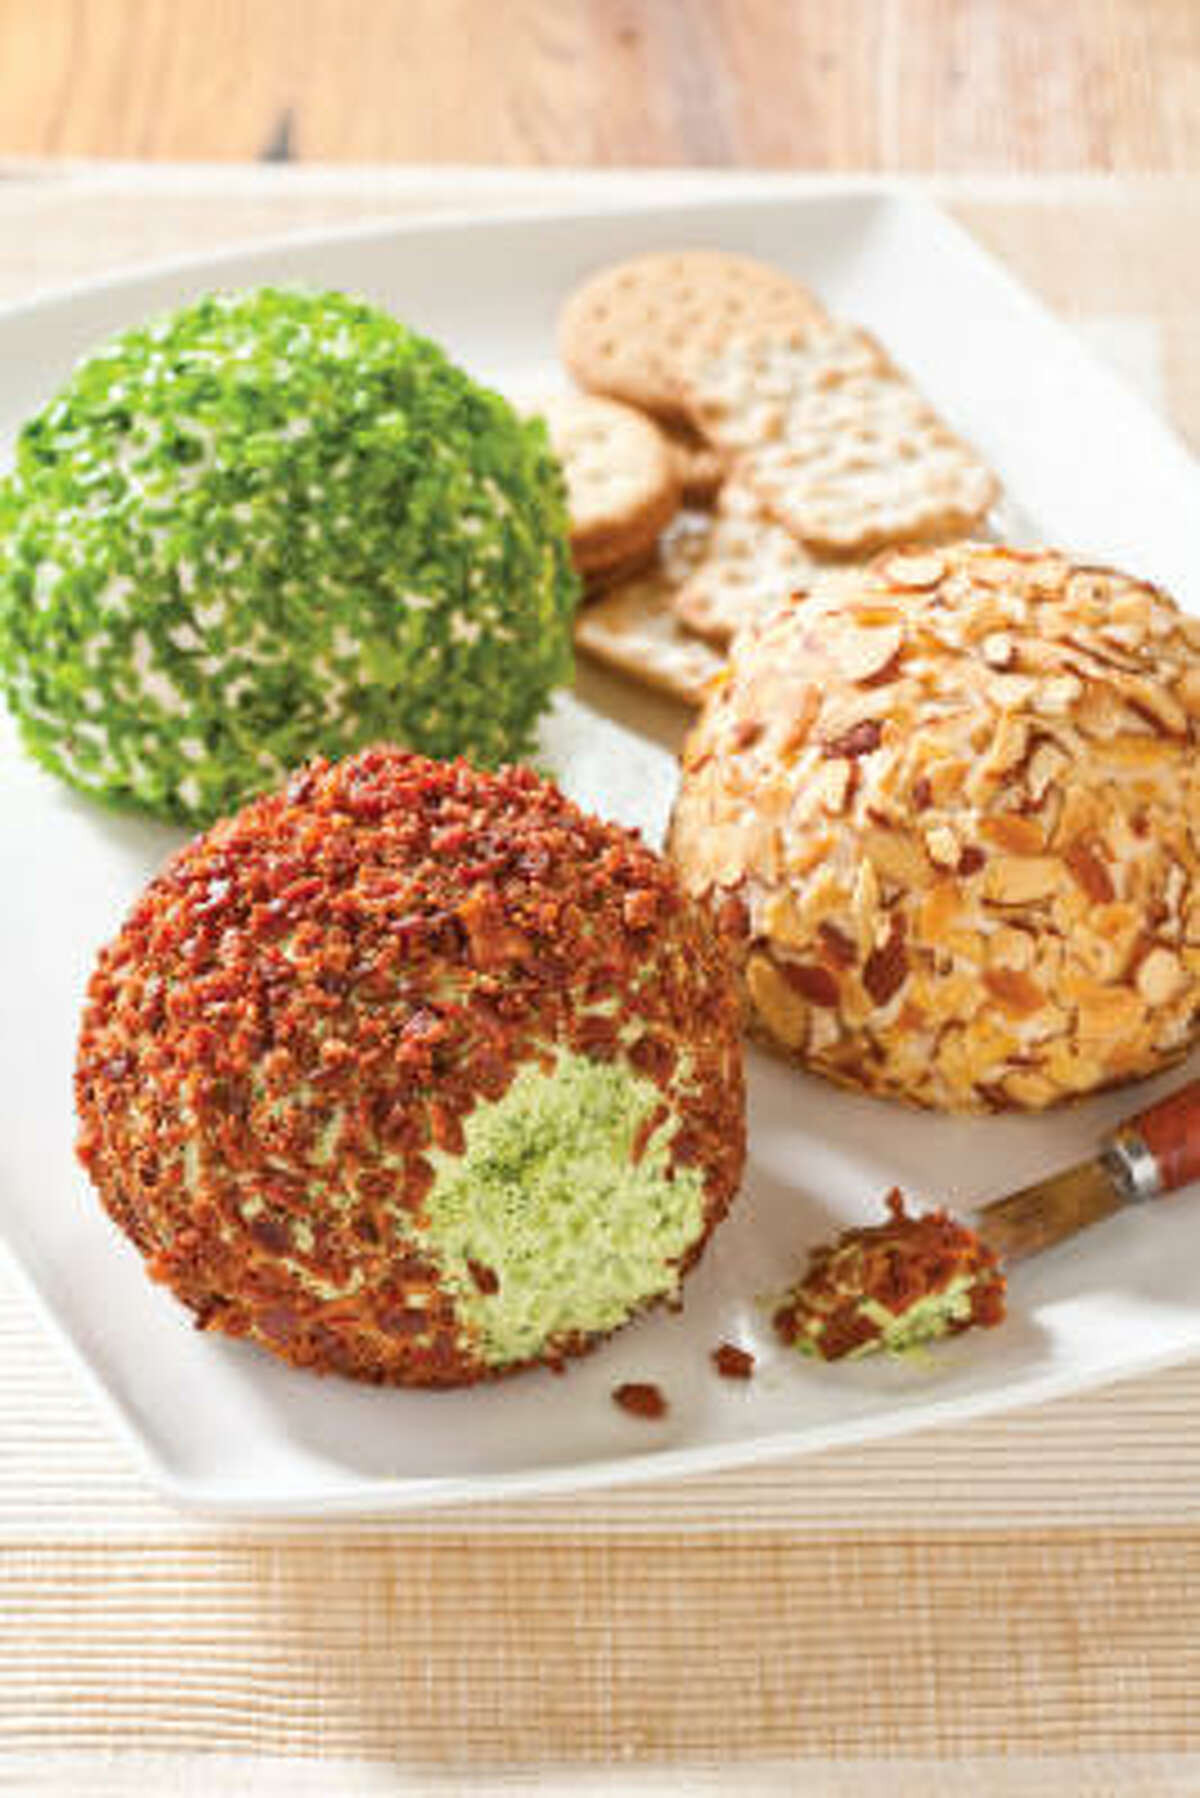 With a few simple substitutions, a Classic Cheddar Cheese Ball recipe can yield infinite variations.